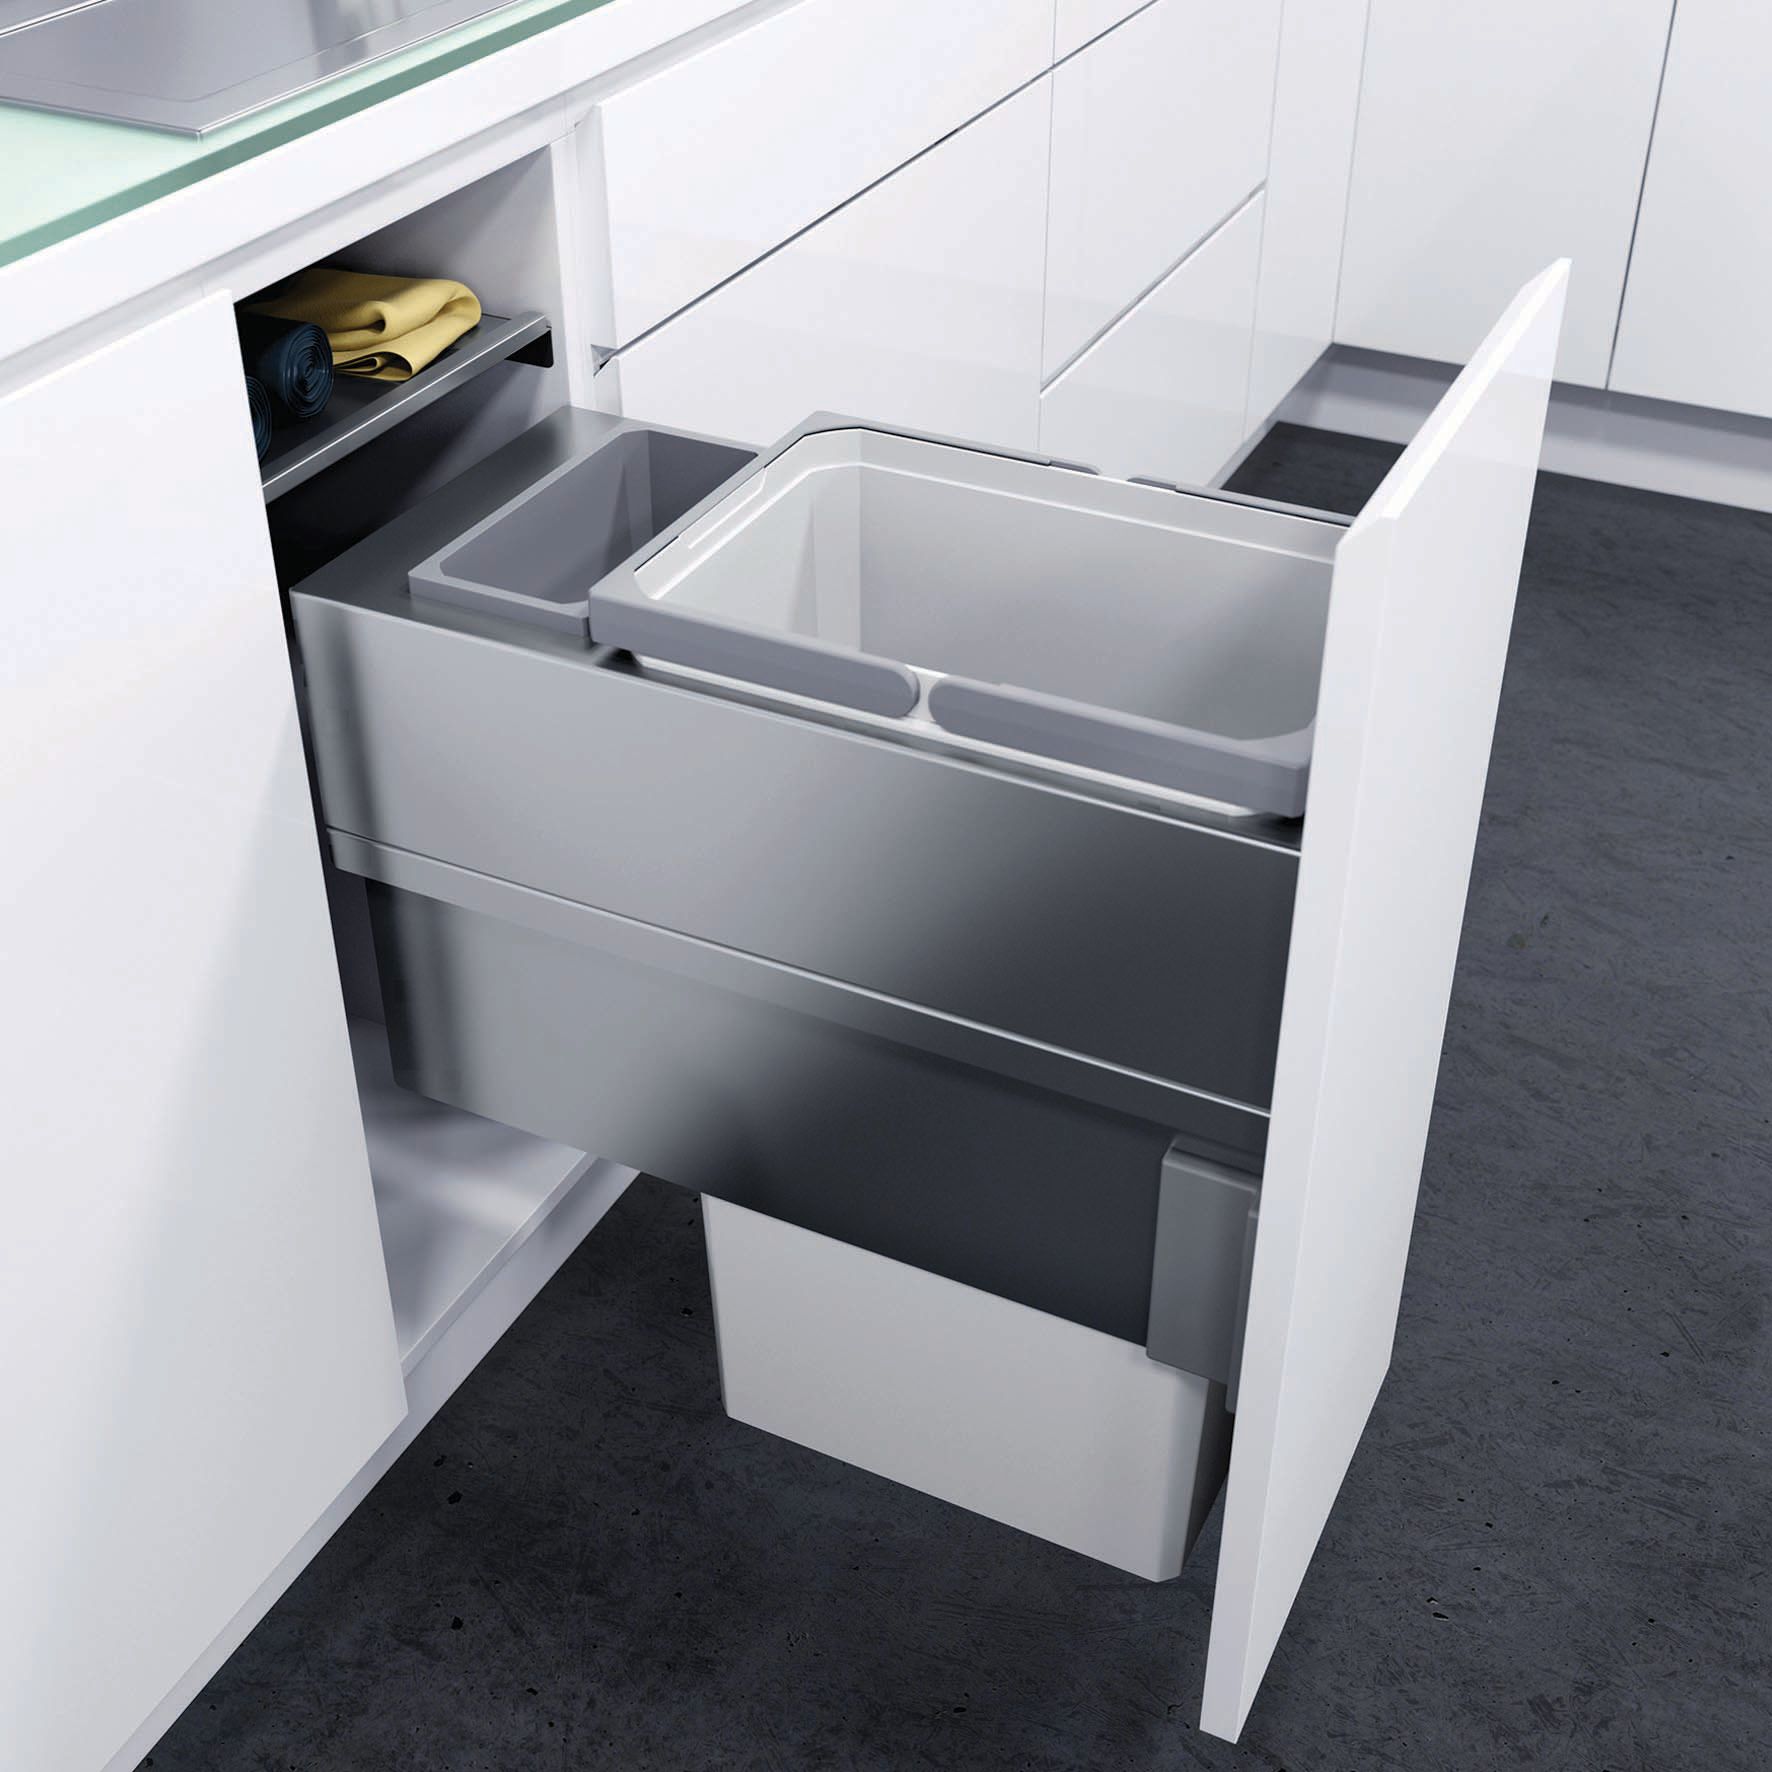 Image of Wickes Full Height Bin for 300mm Base Unit